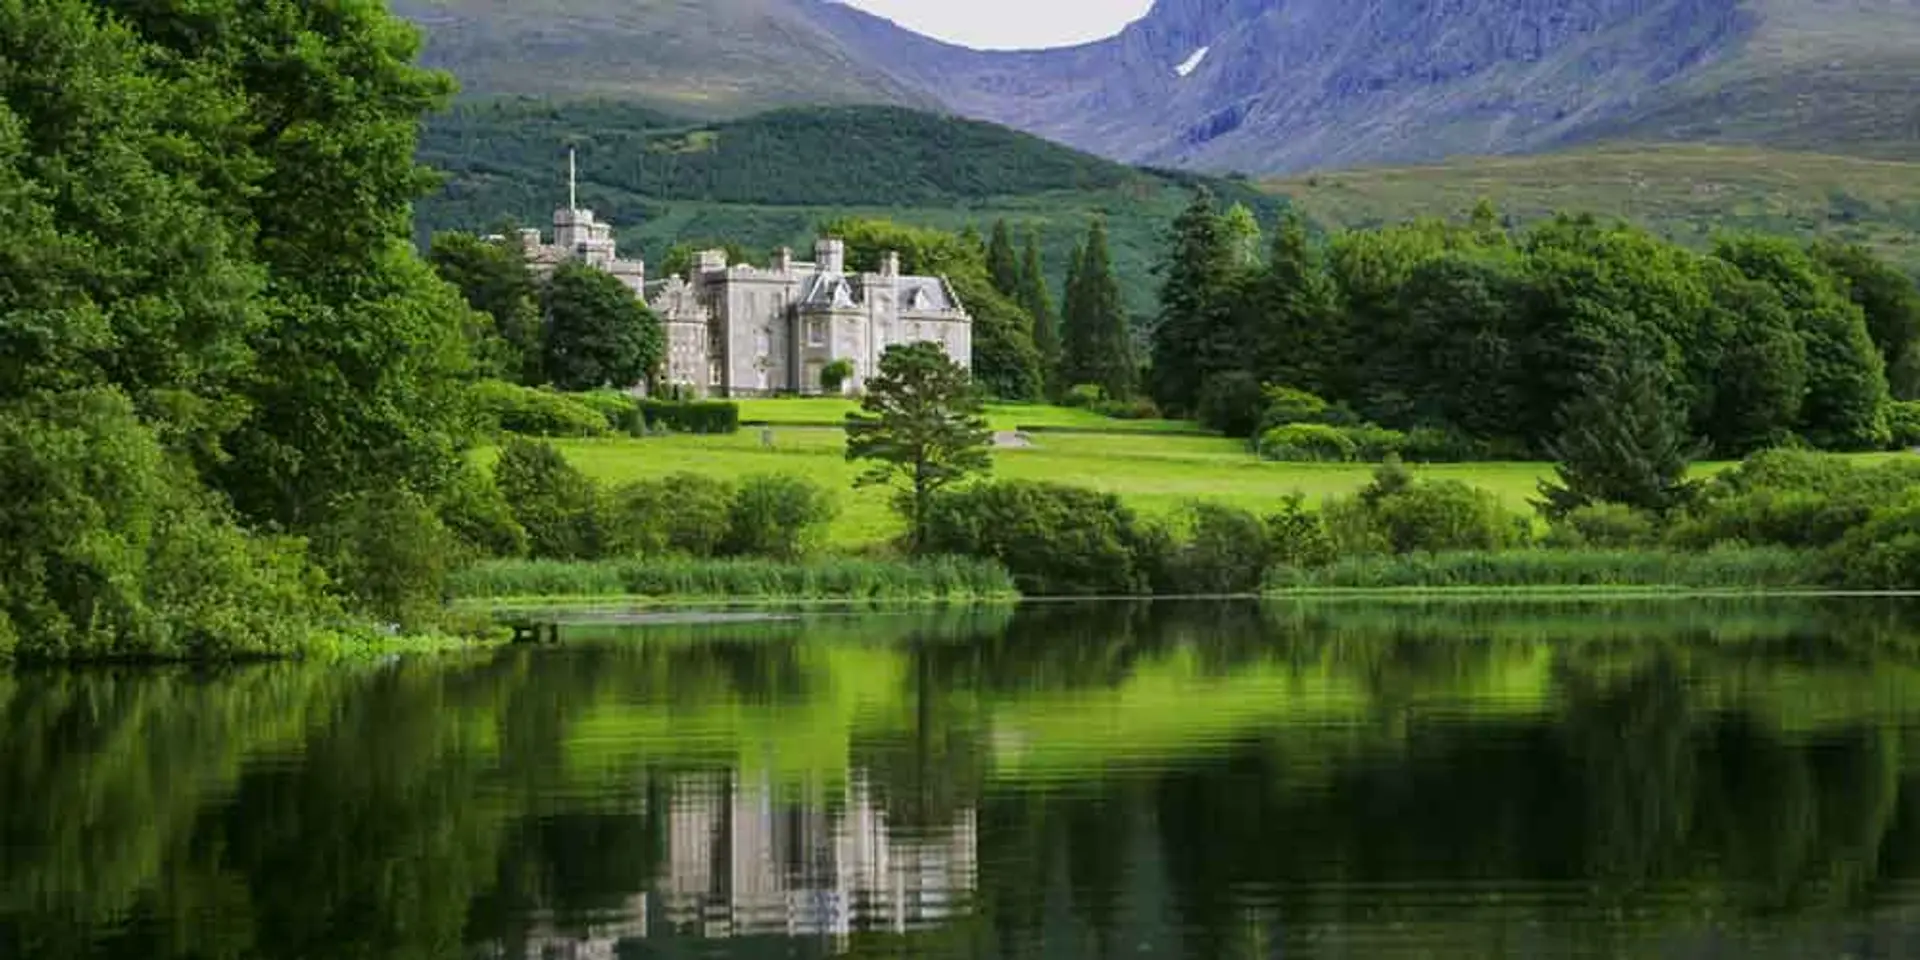 Hotels Toplists - The Best Luxury Hotels in the Scottish Highlands